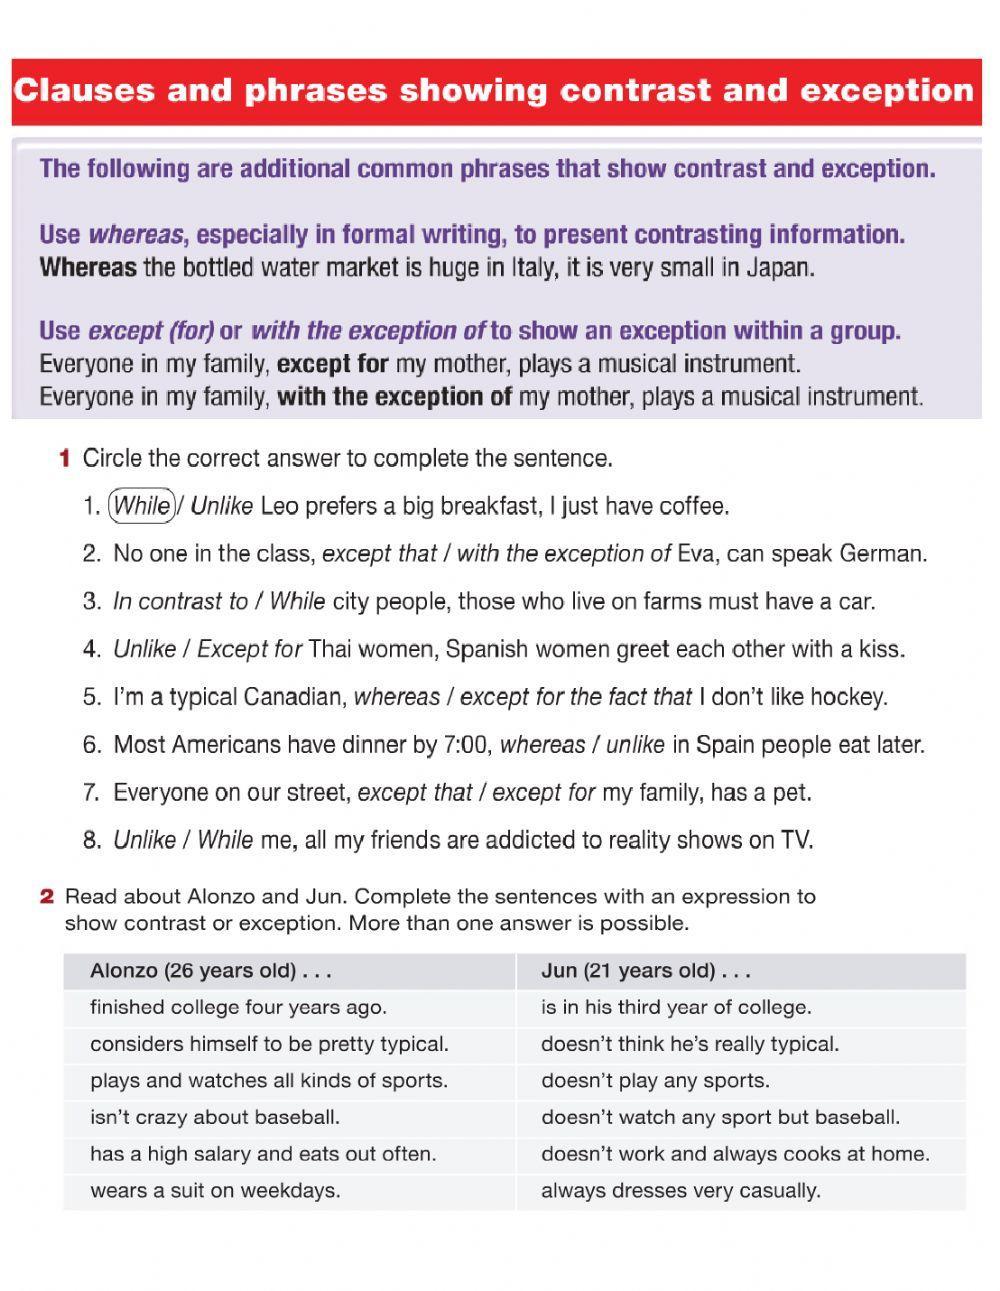 Clauses and Phrases Showing Contrast and Exception